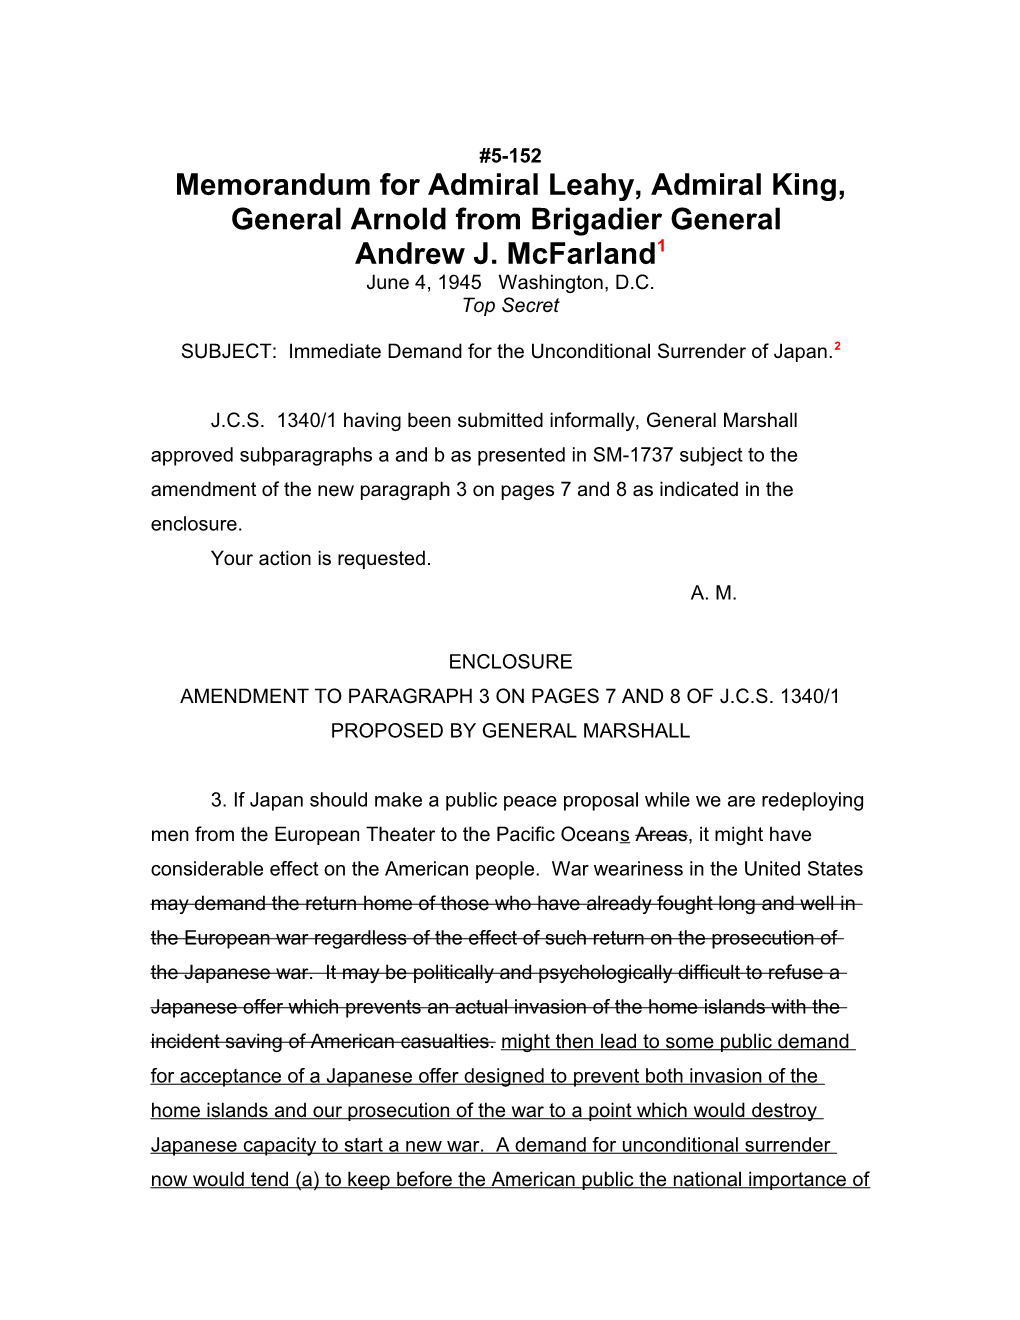 Memorandum for Admiral Leahy, Admiral King, General Arnold from Brigadier General